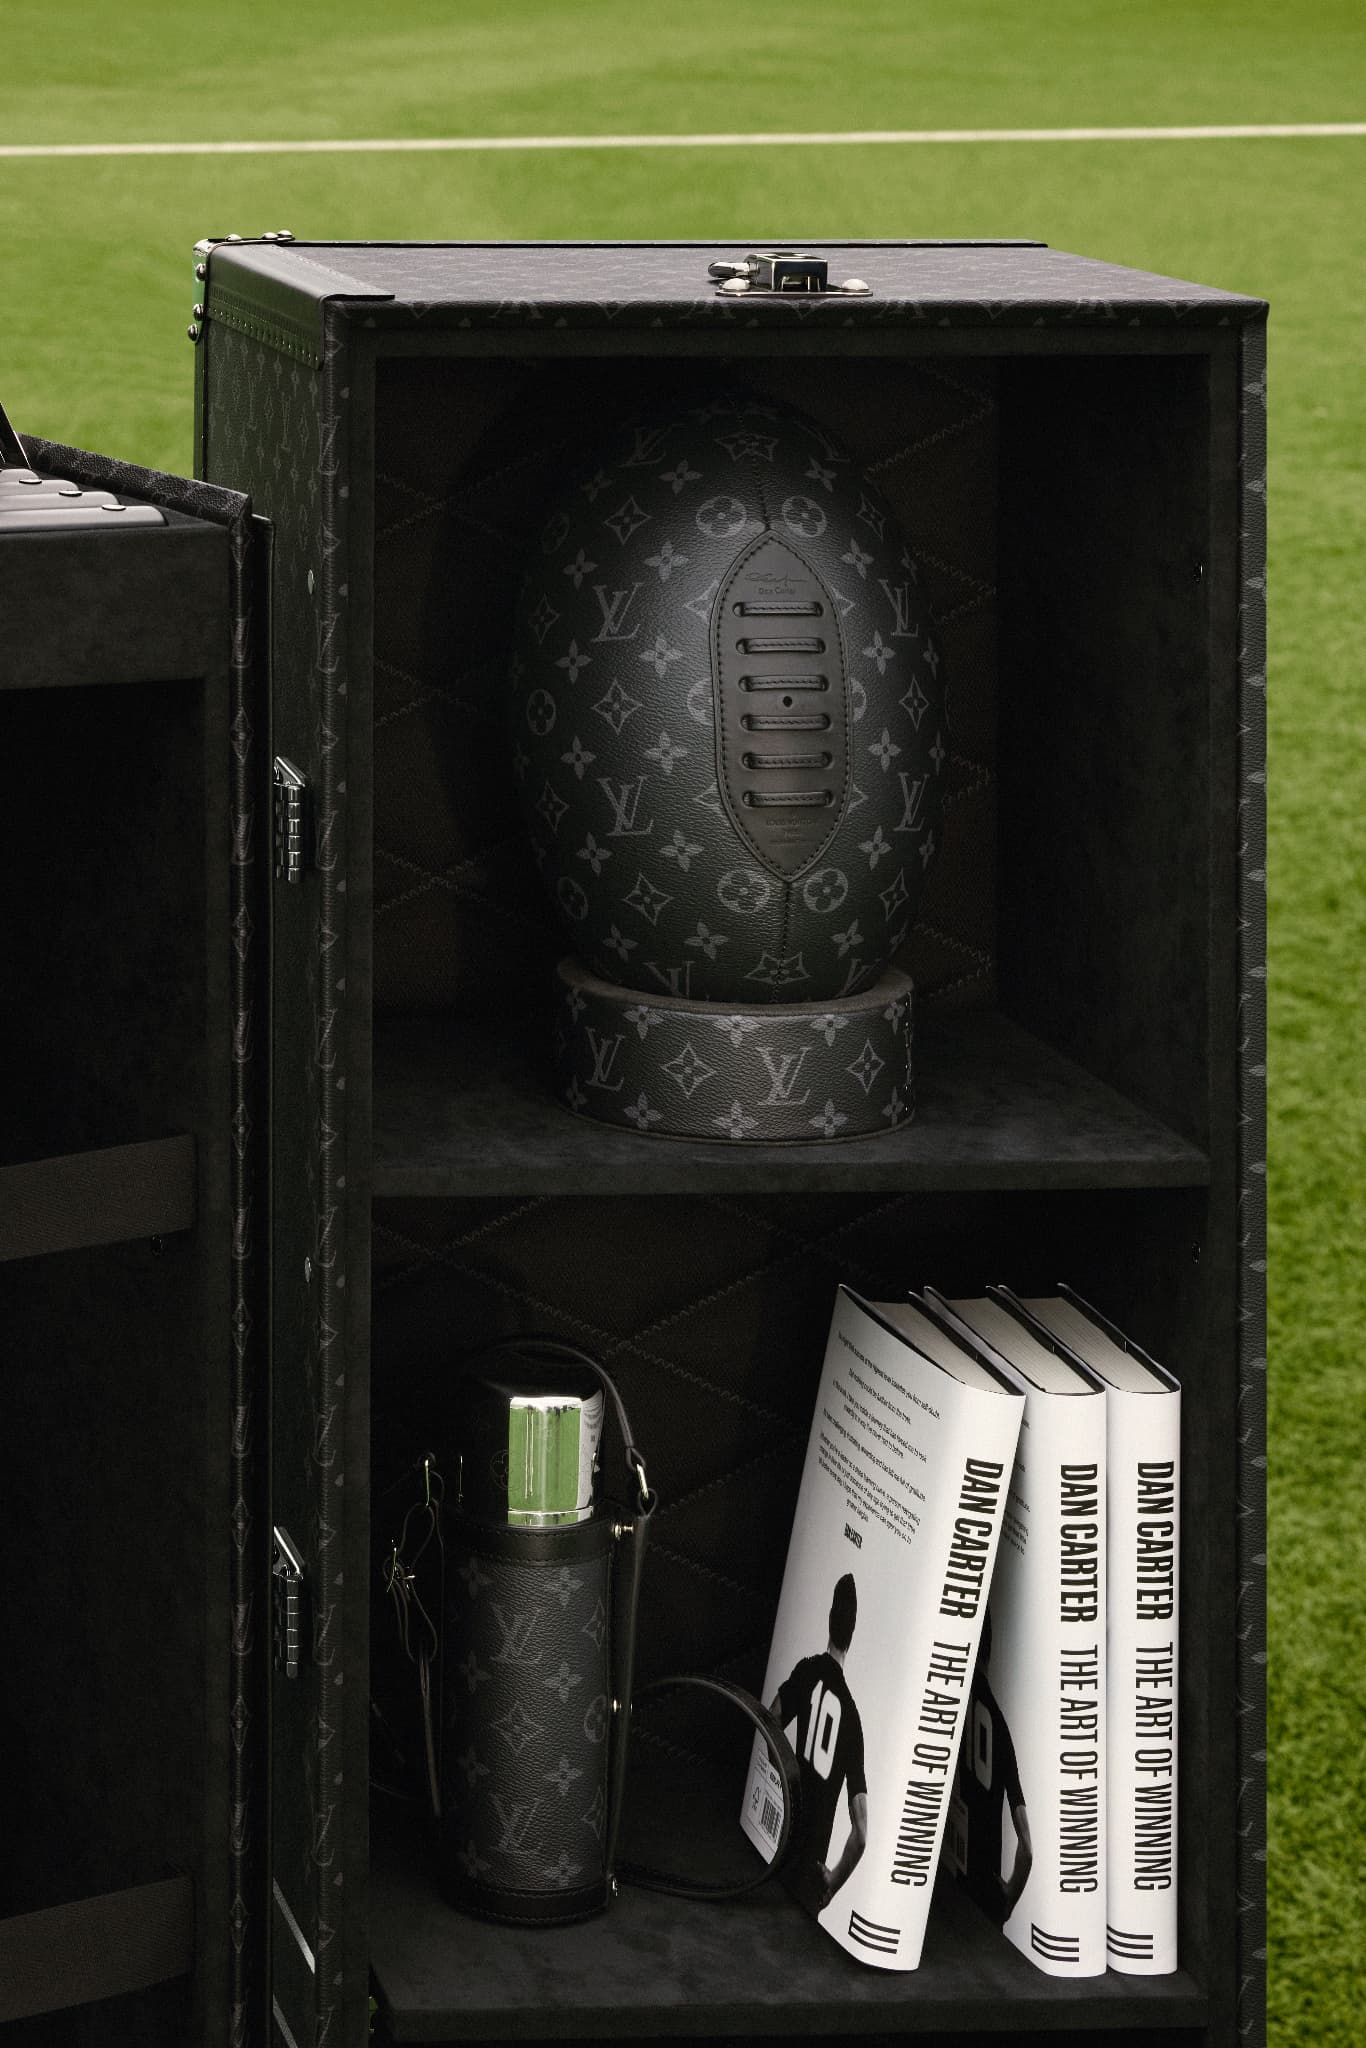 Louis Vuitton in a Spectacular Rugby World Cup - The Luxonomist